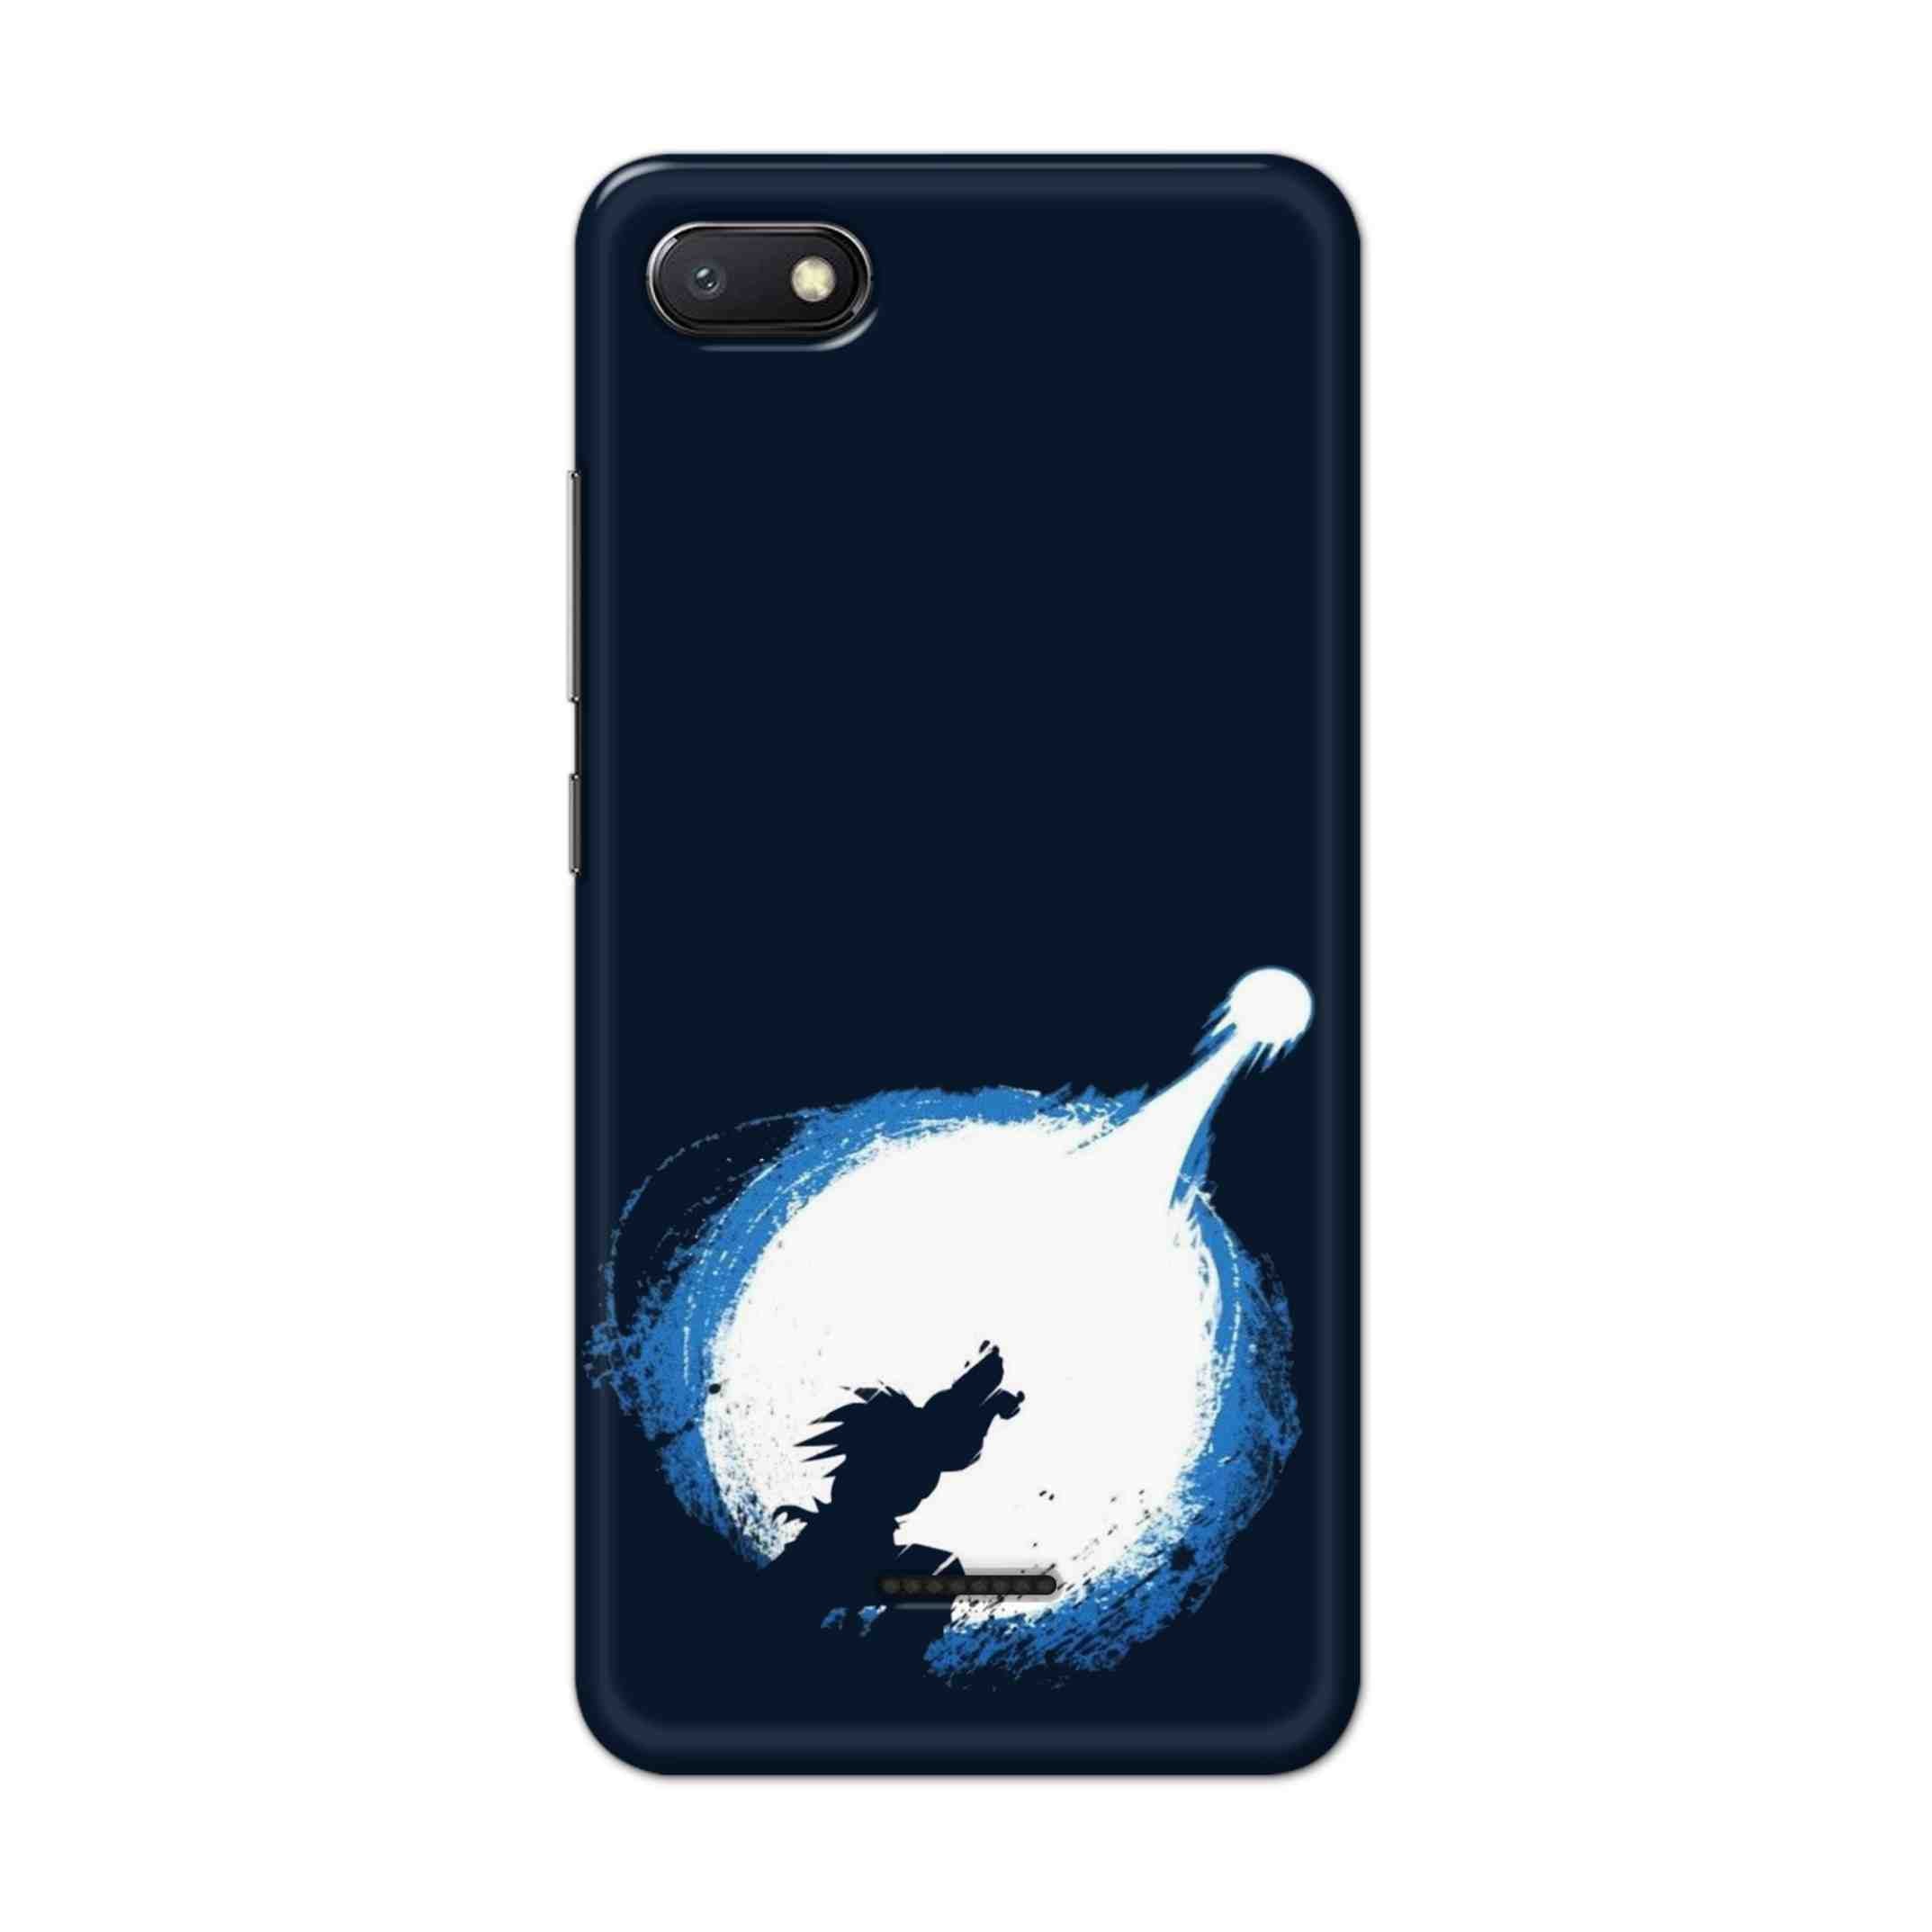 Buy Goku Power Hard Back Mobile Phone Case/Cover For Xiaomi Redmi 6A Online